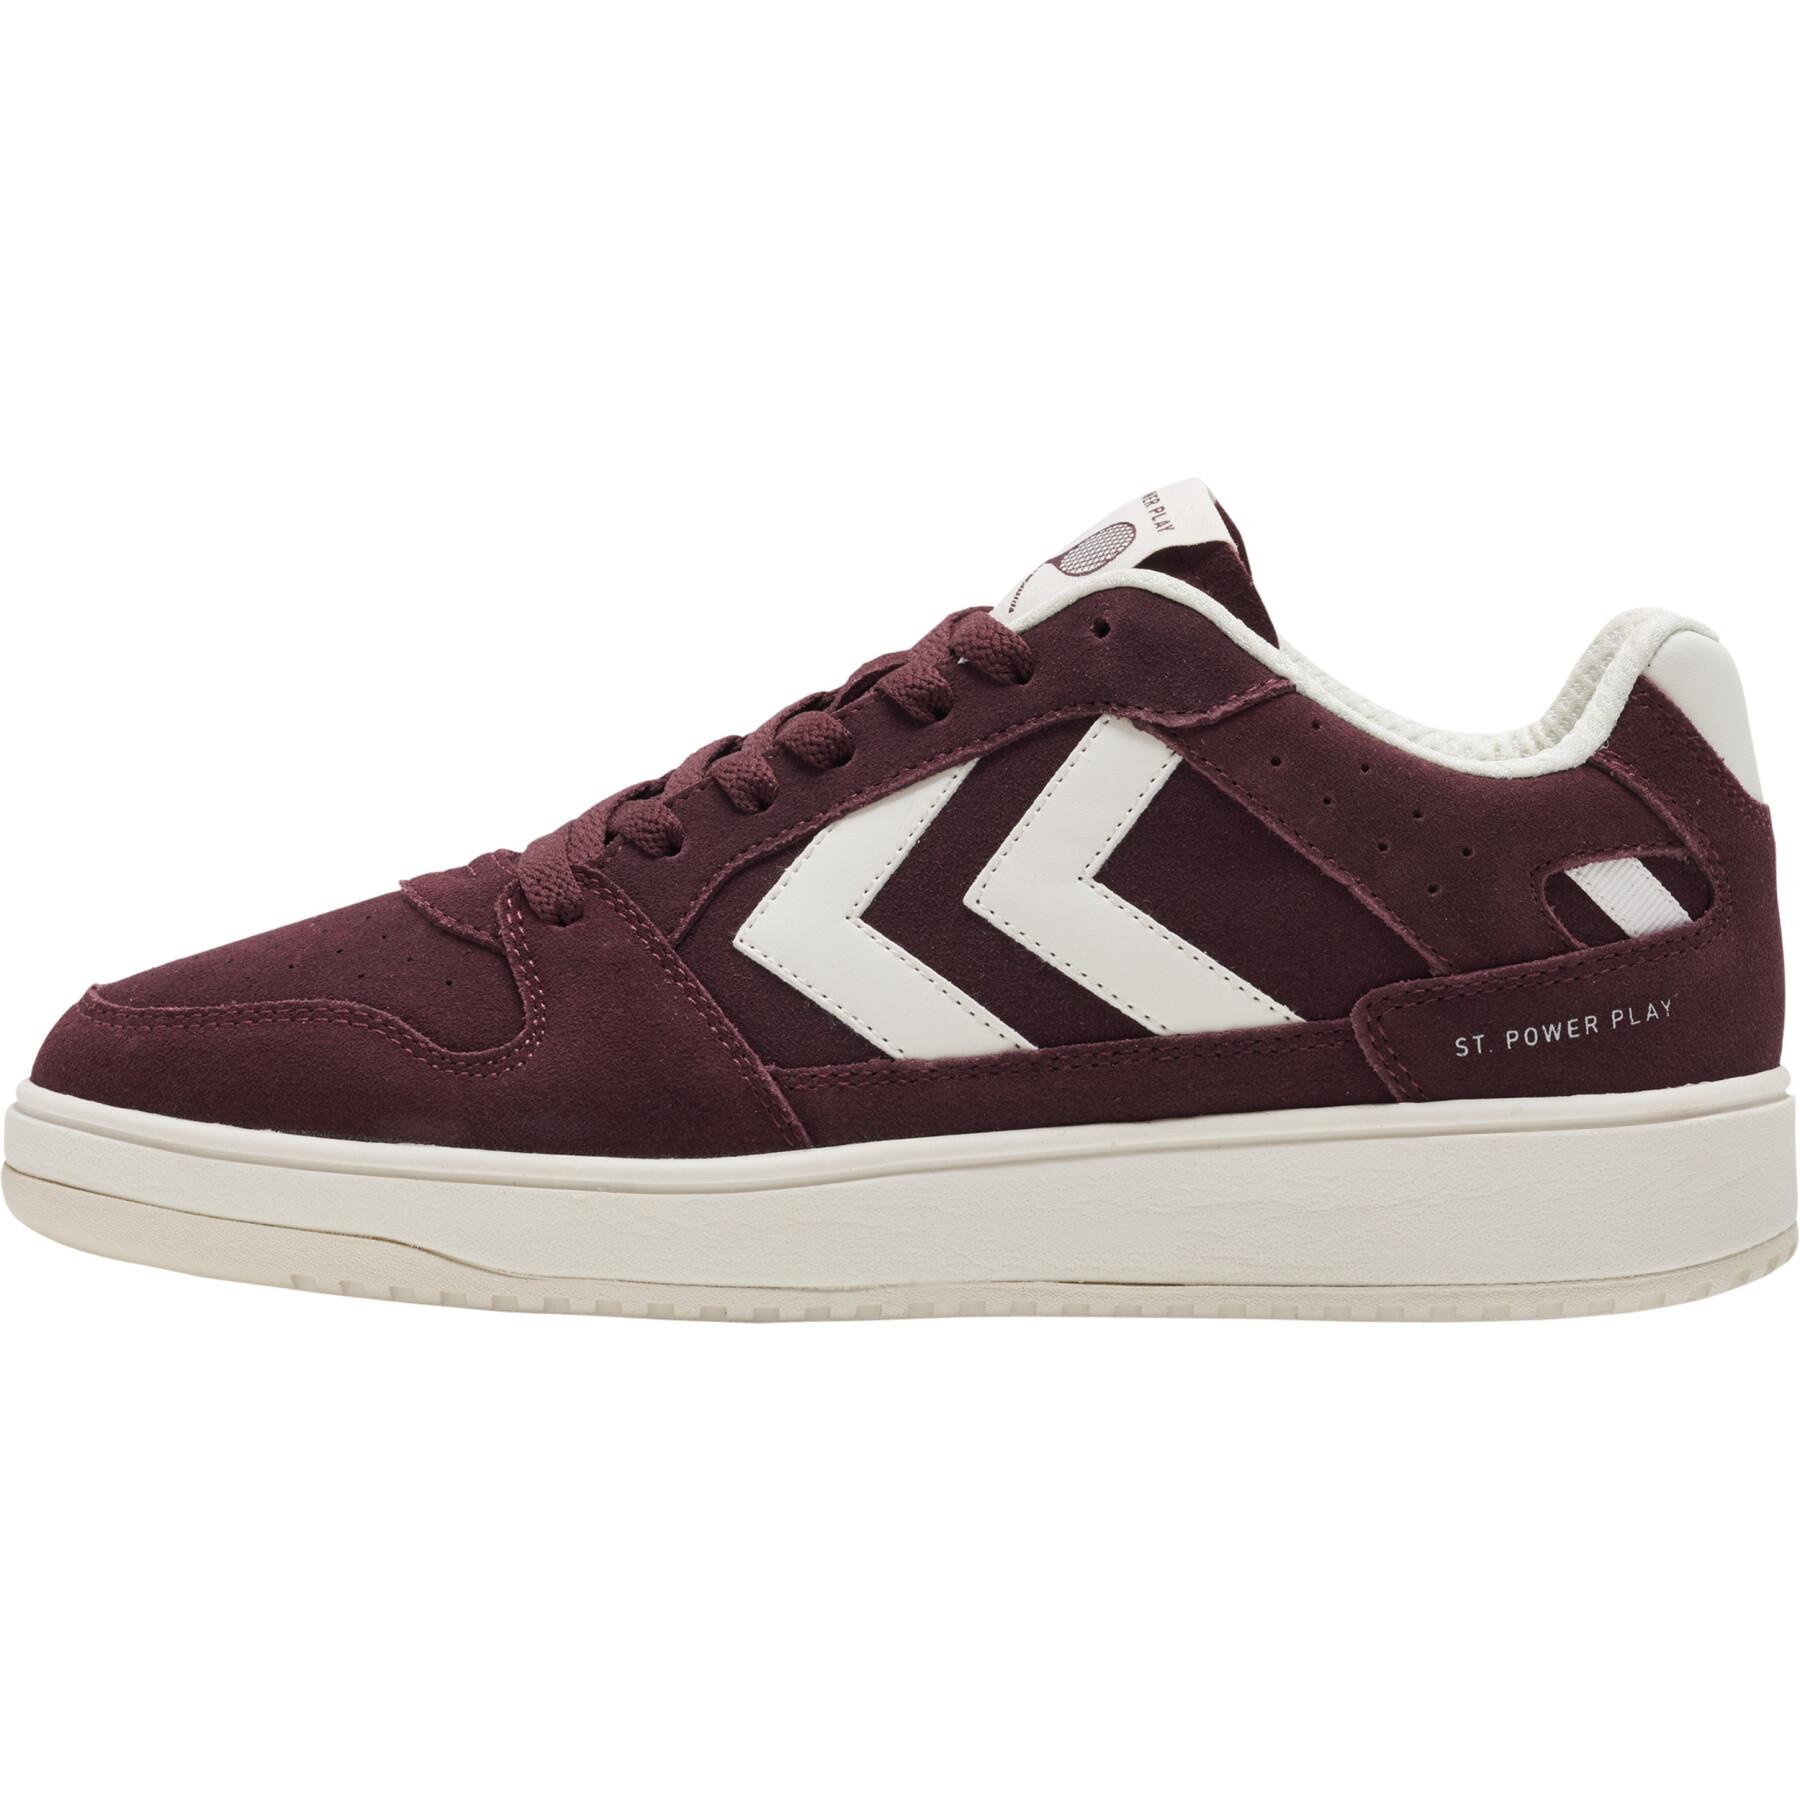 Sneakers Hummel St. Power Play Suede - Hummel - Brands - Lifestyle